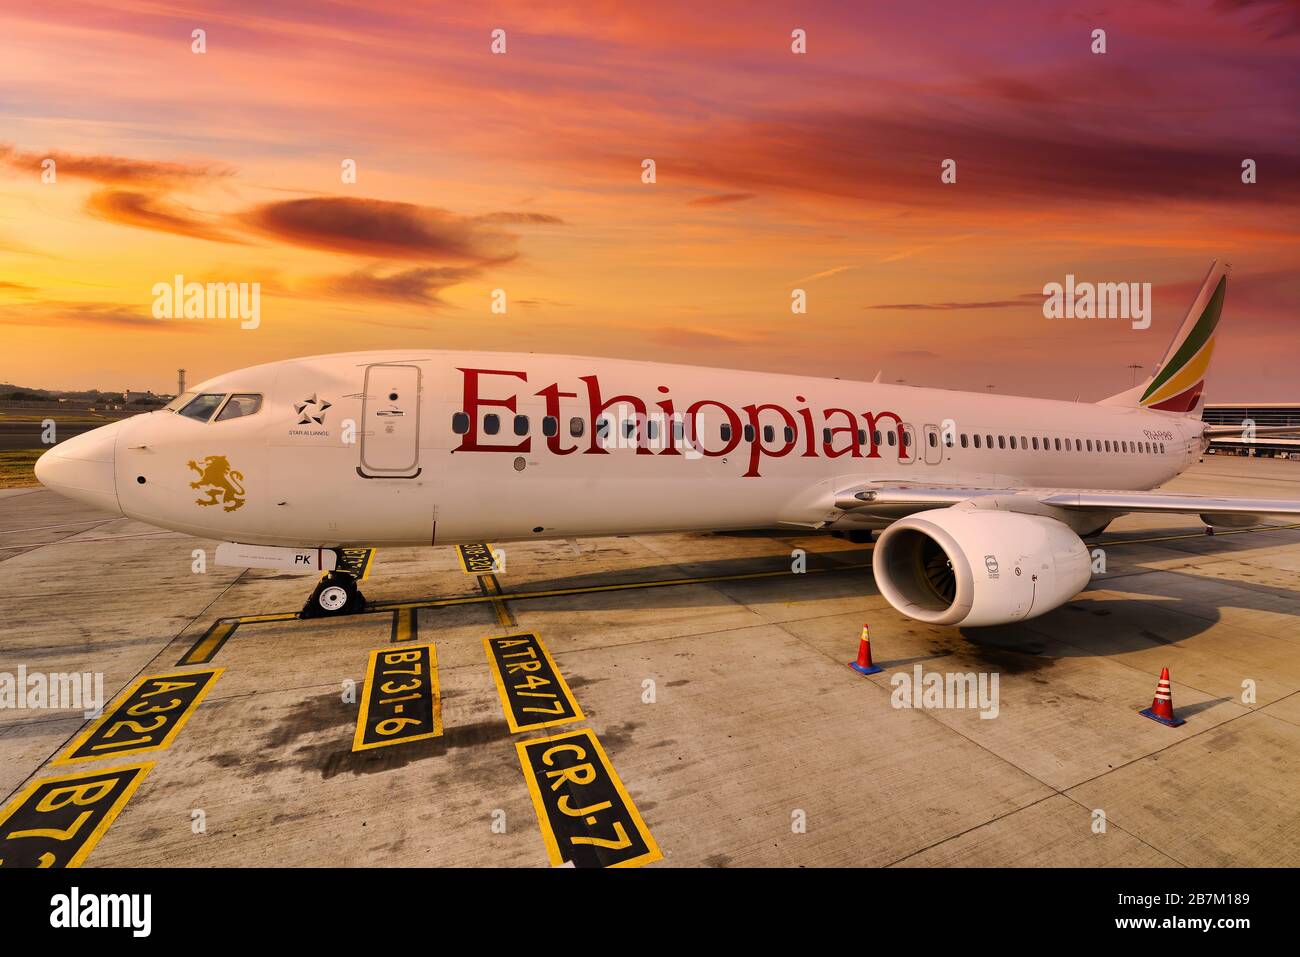 Ethiopian Airlines Boeing 737 Aircraft Stock Photo